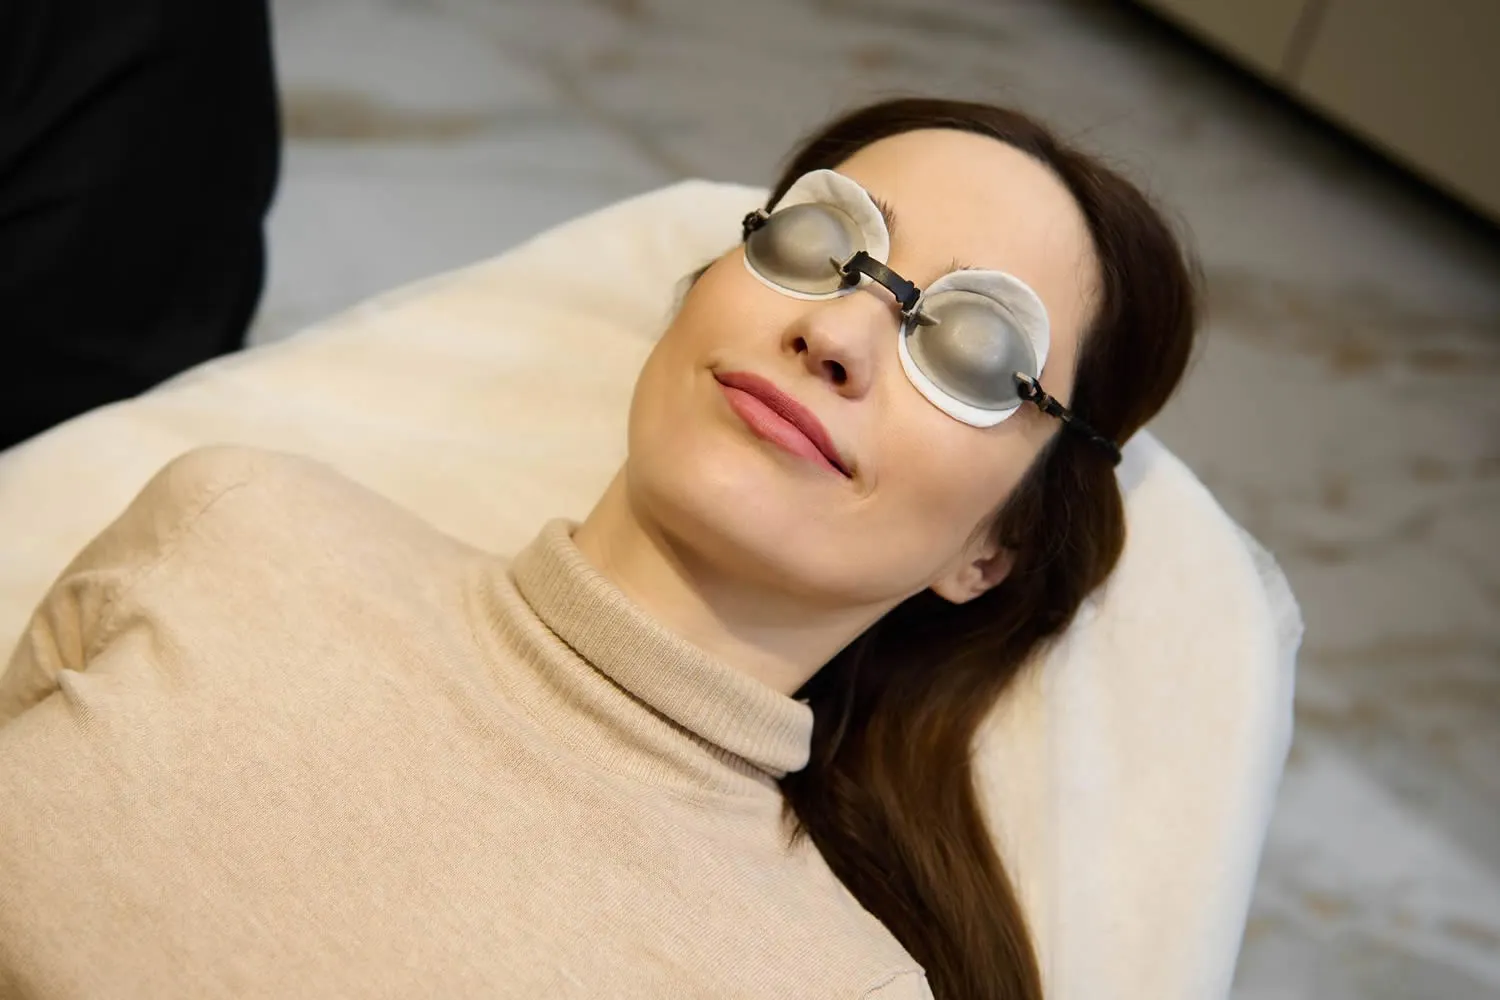 woma-getting-laser-treatment-at-cosmetic-dermatology-office